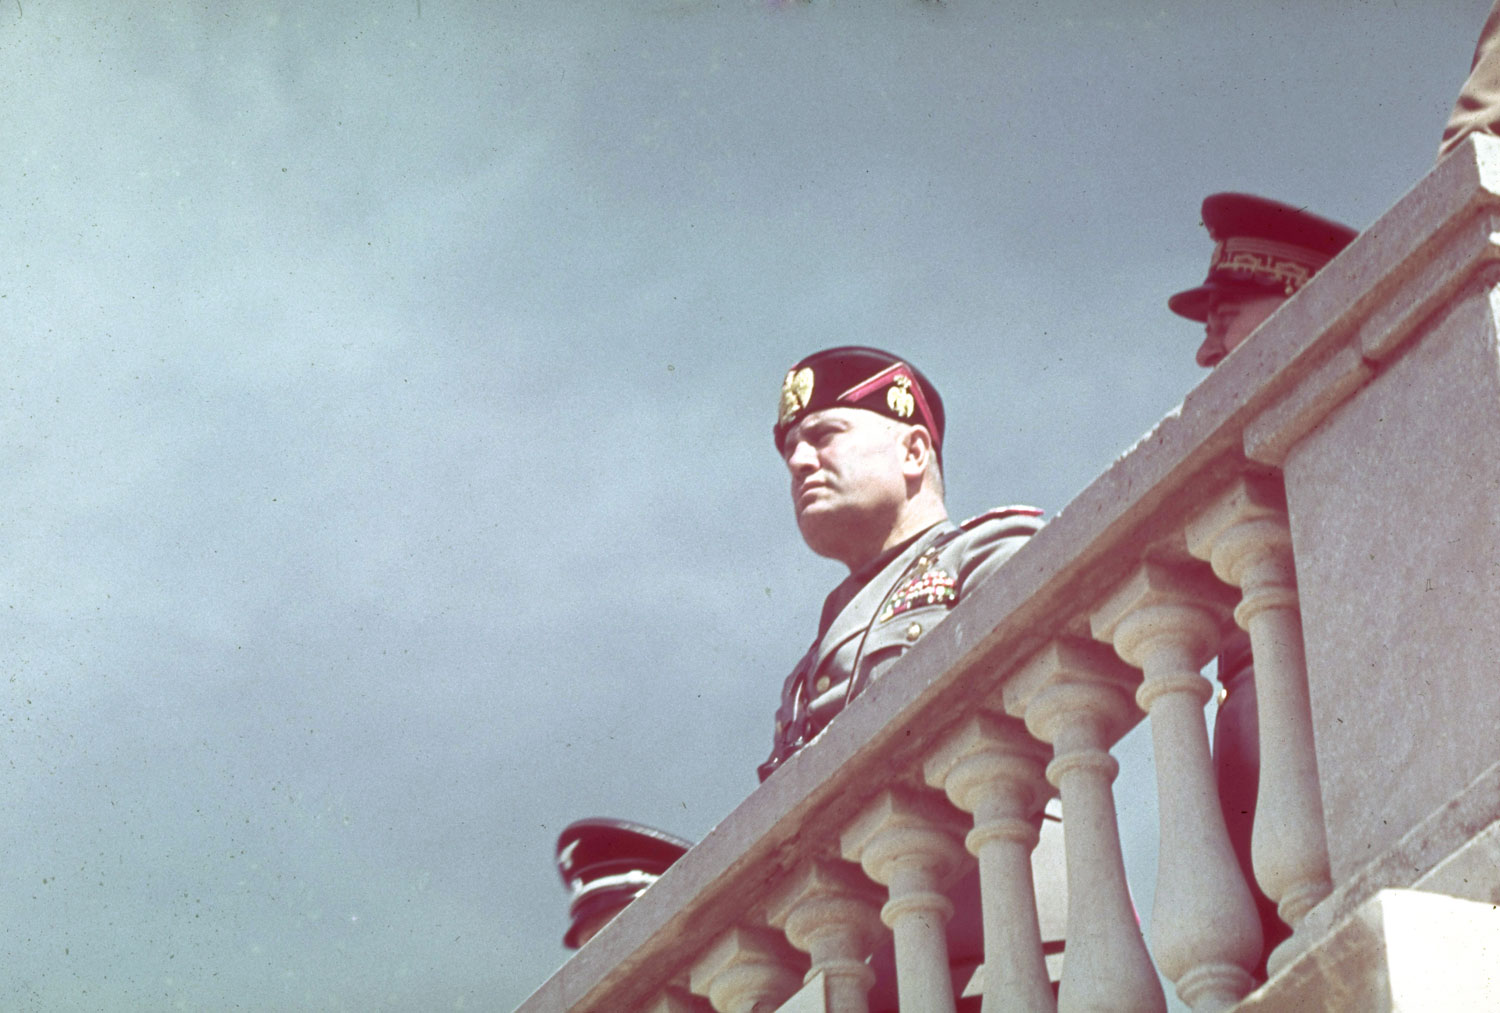 Benito Mussolini during Adolf Hitler's 1938 state visit to Italy.